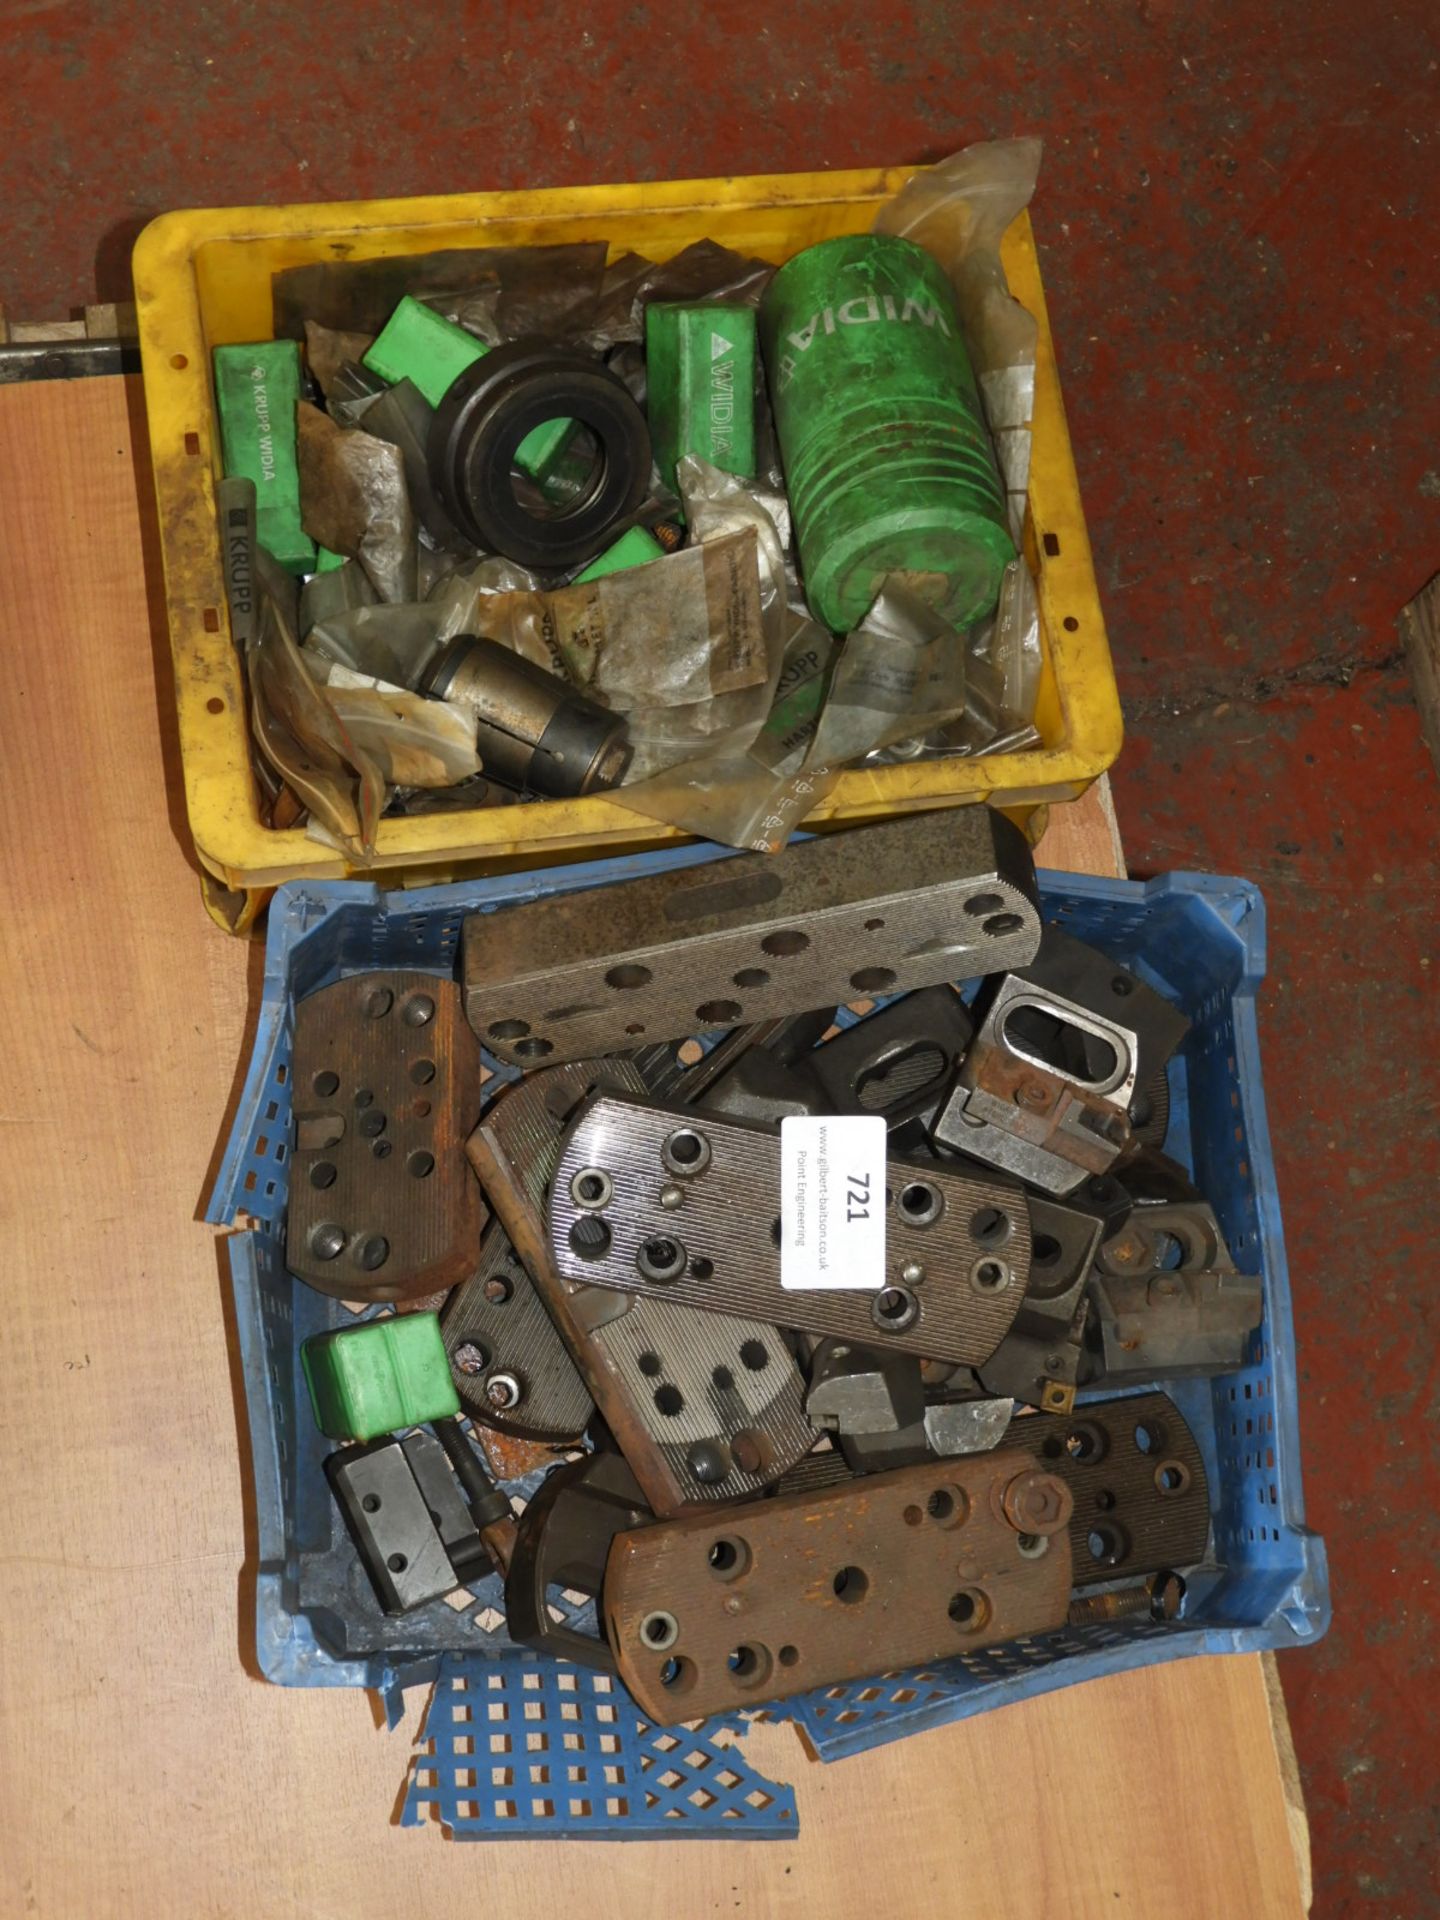 *Two Boxes of Boring Head Spares